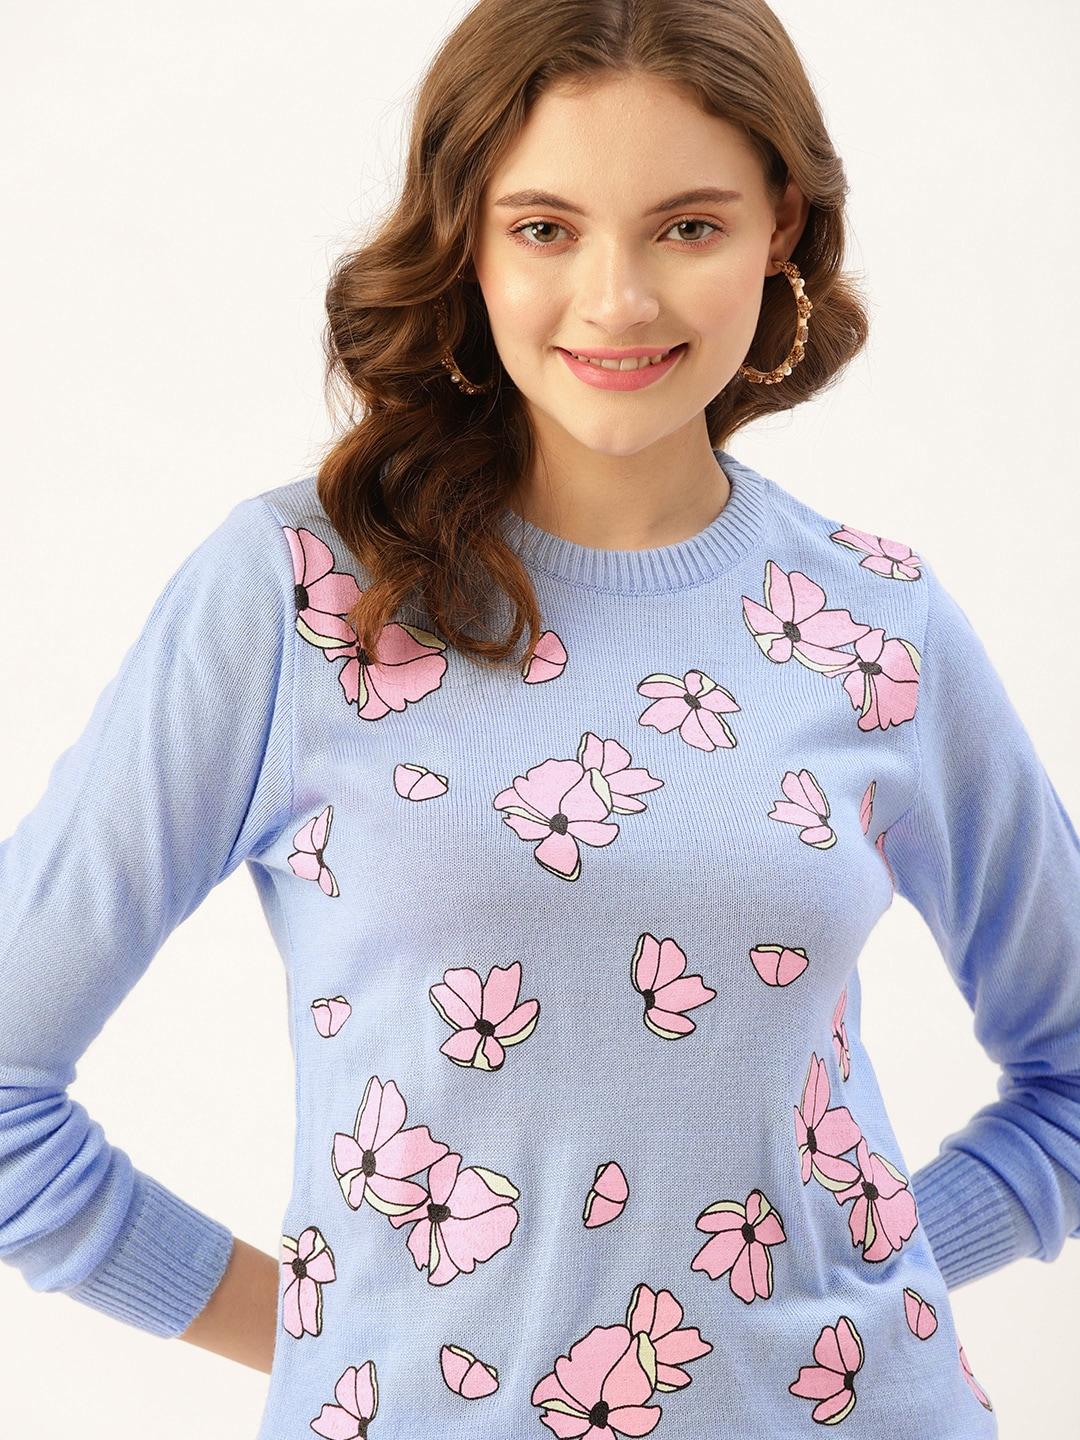 dressberry women blue floral printed pullover